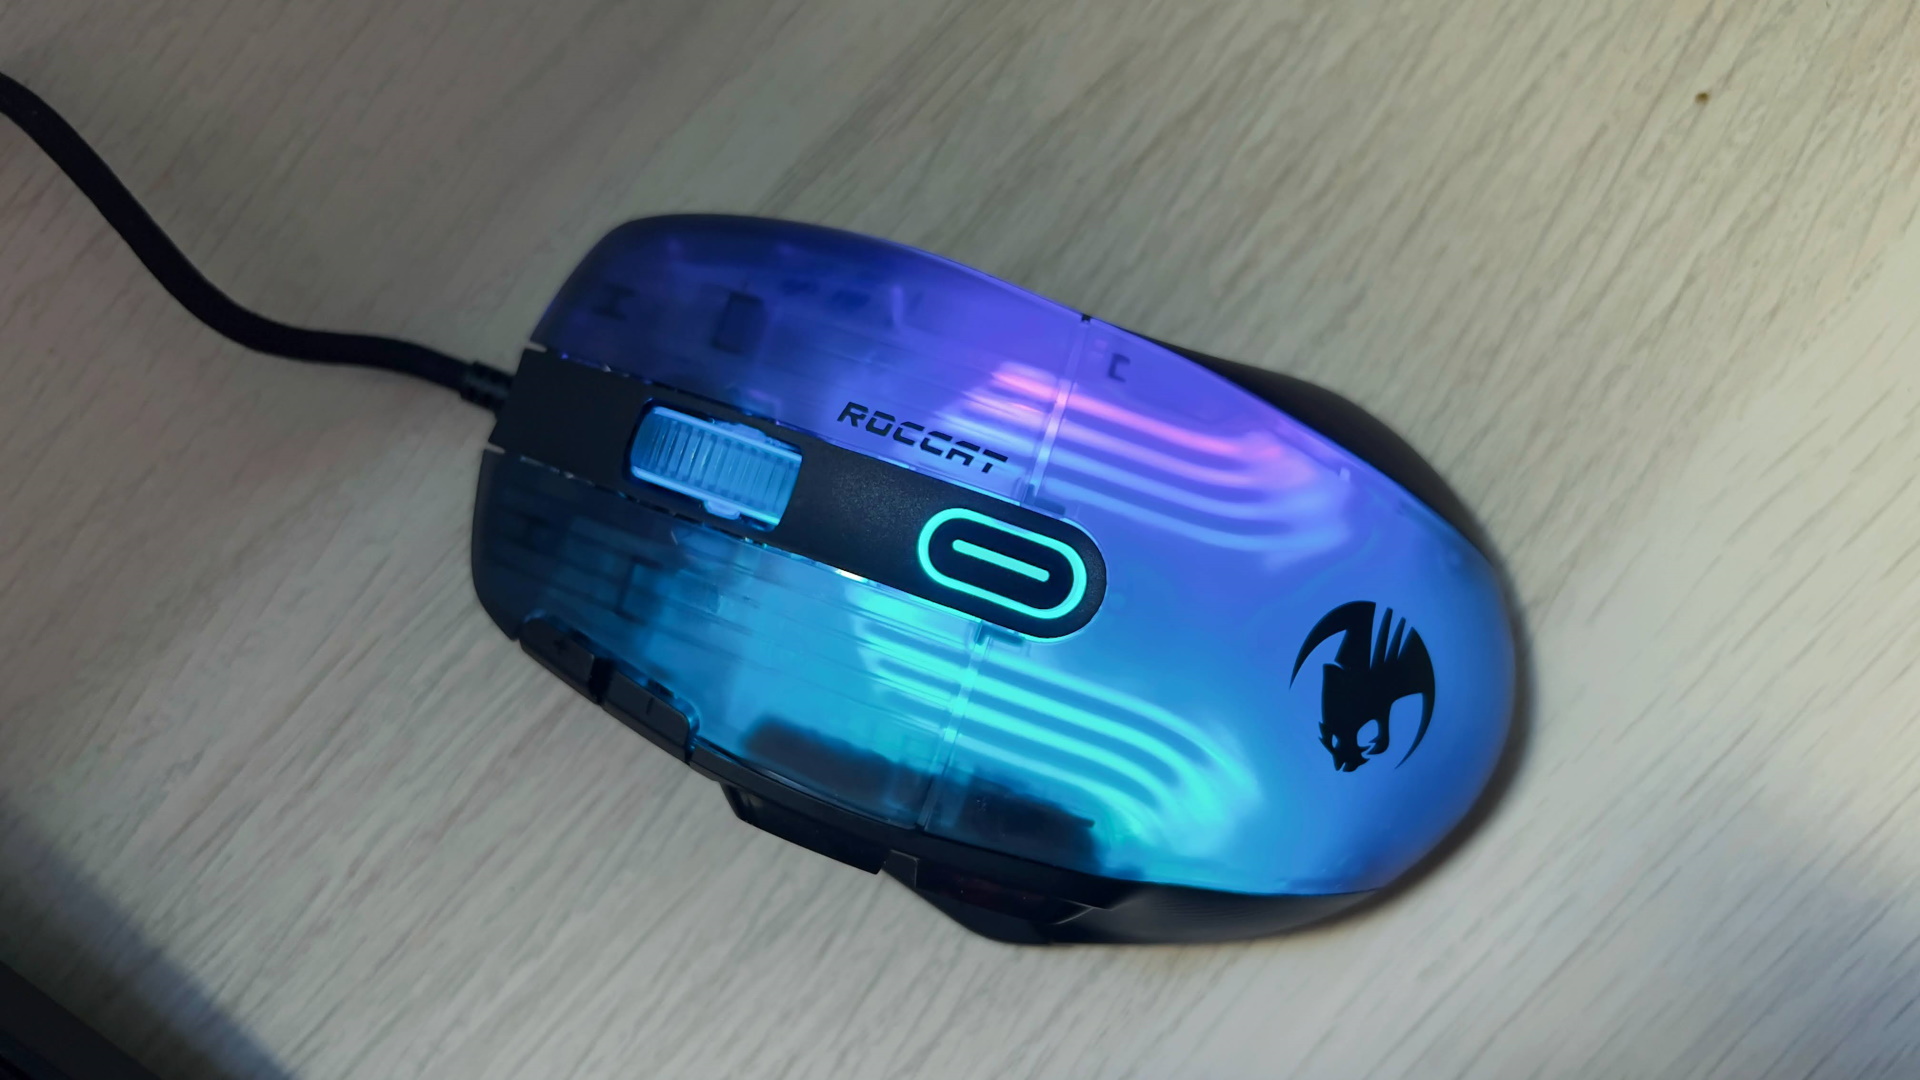 Roccat Kone XP gaming mouse